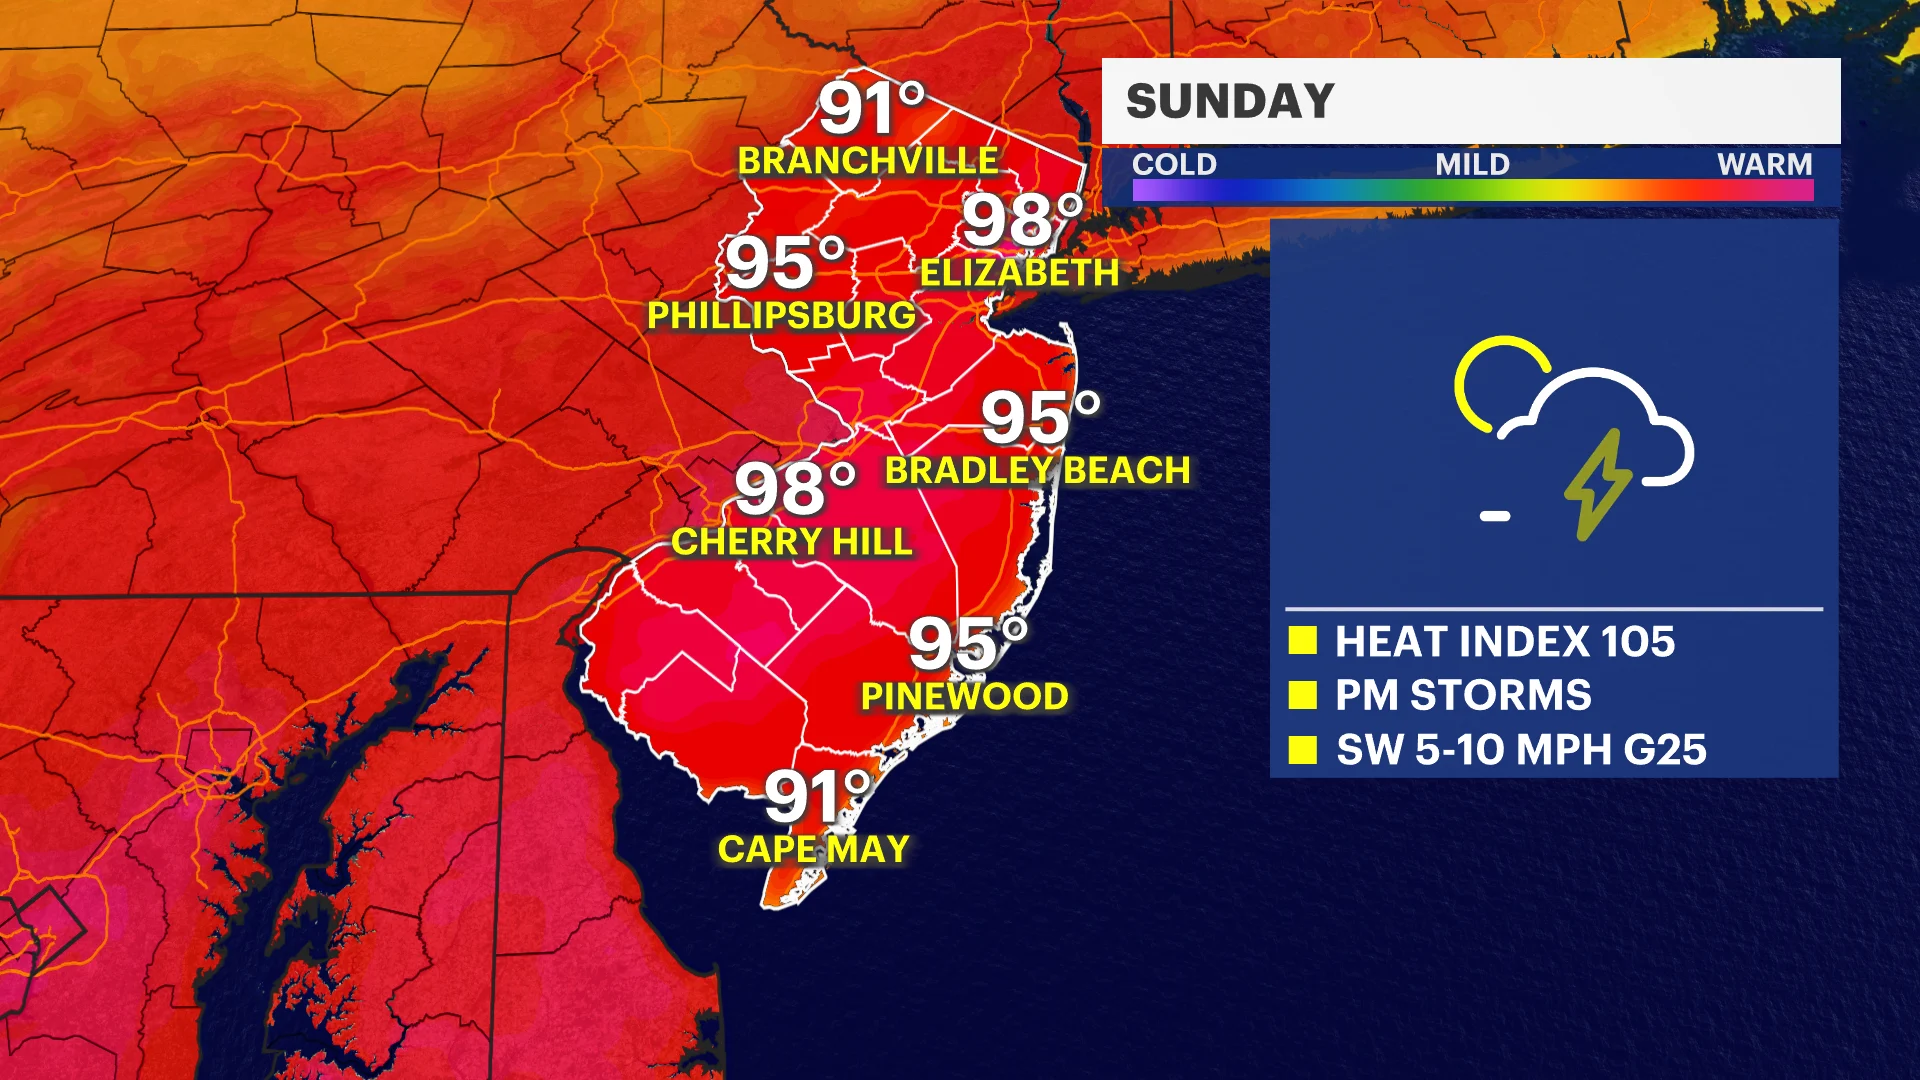 STORM WATCH: Tracking severe storms Sunday in New Jersey as brutal heat continues